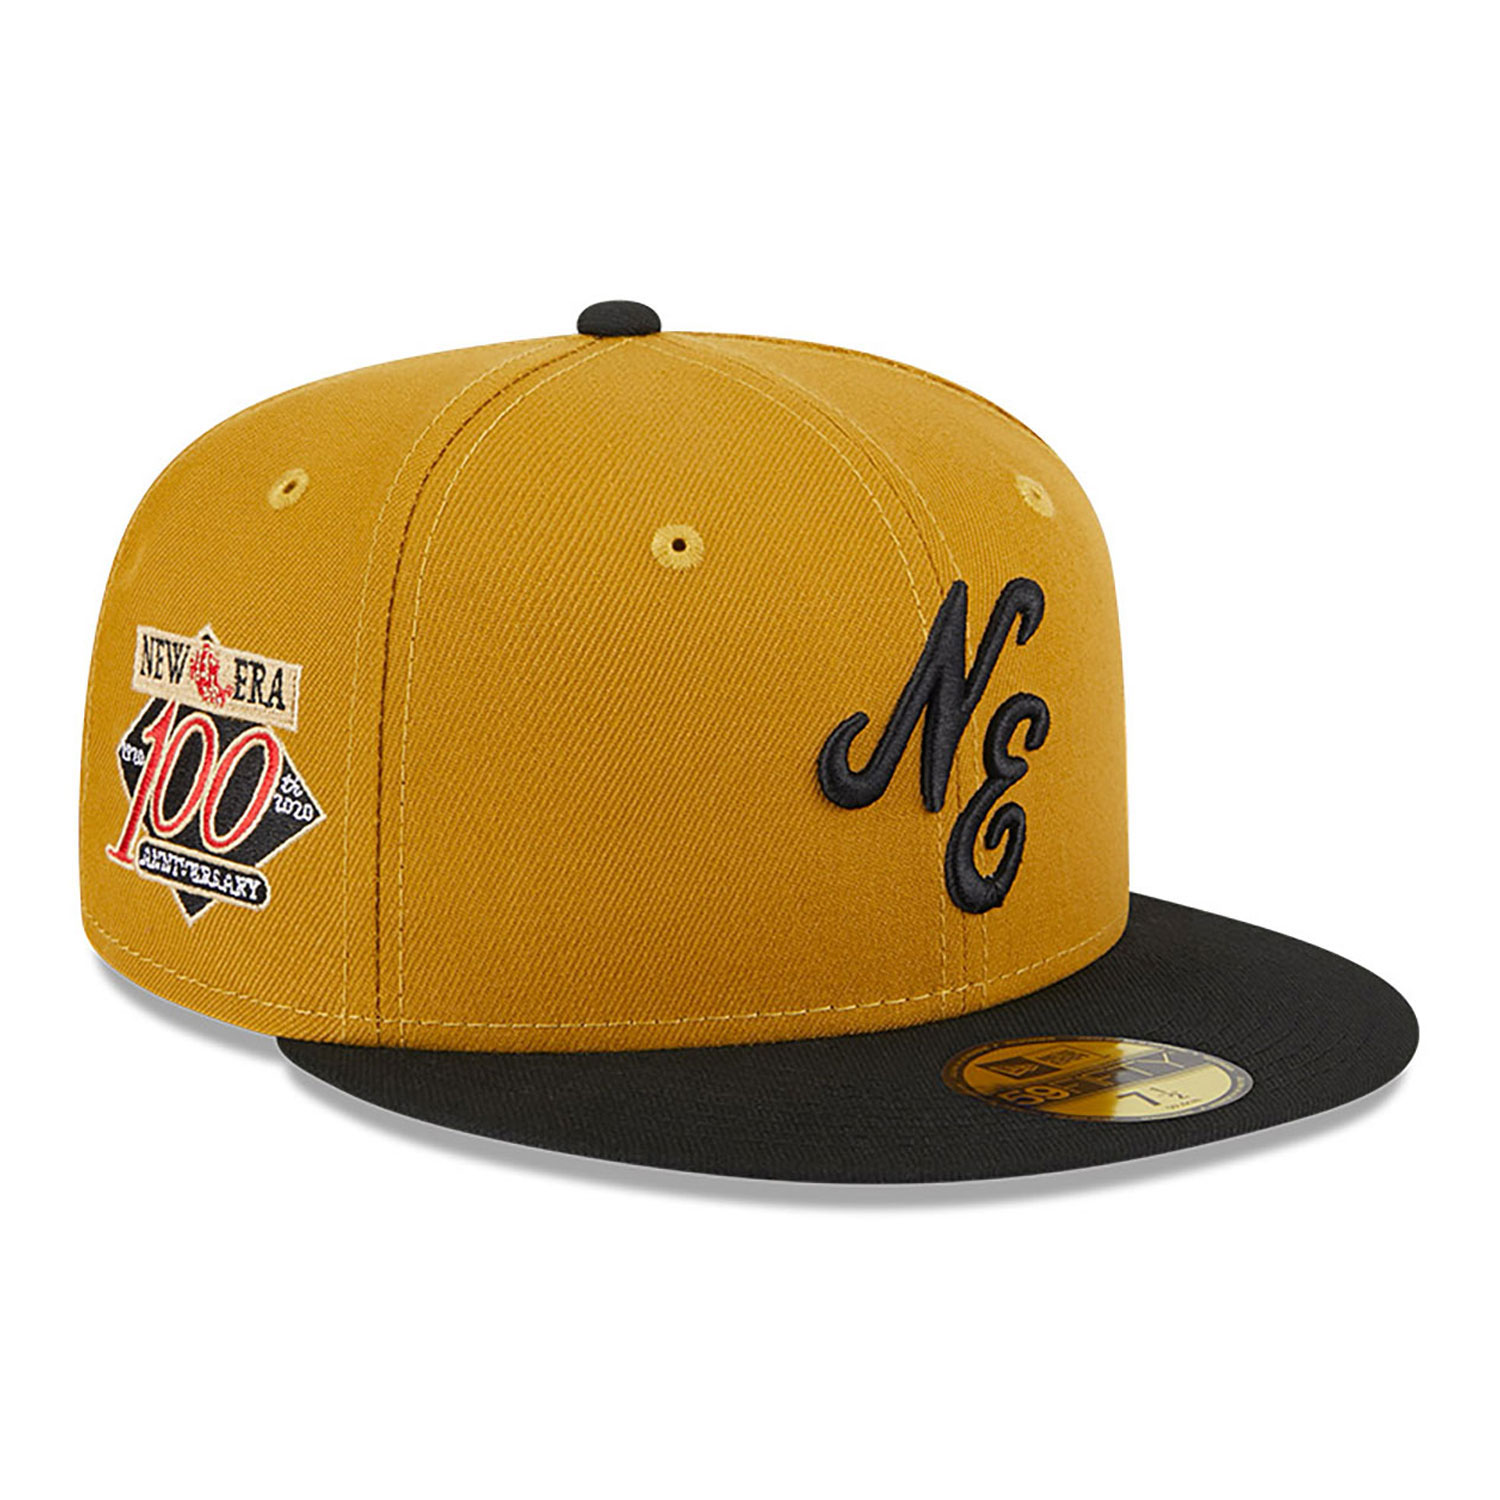 Official New Era 59FIFTY Day 59FIFTY Fitted Cap D01_887